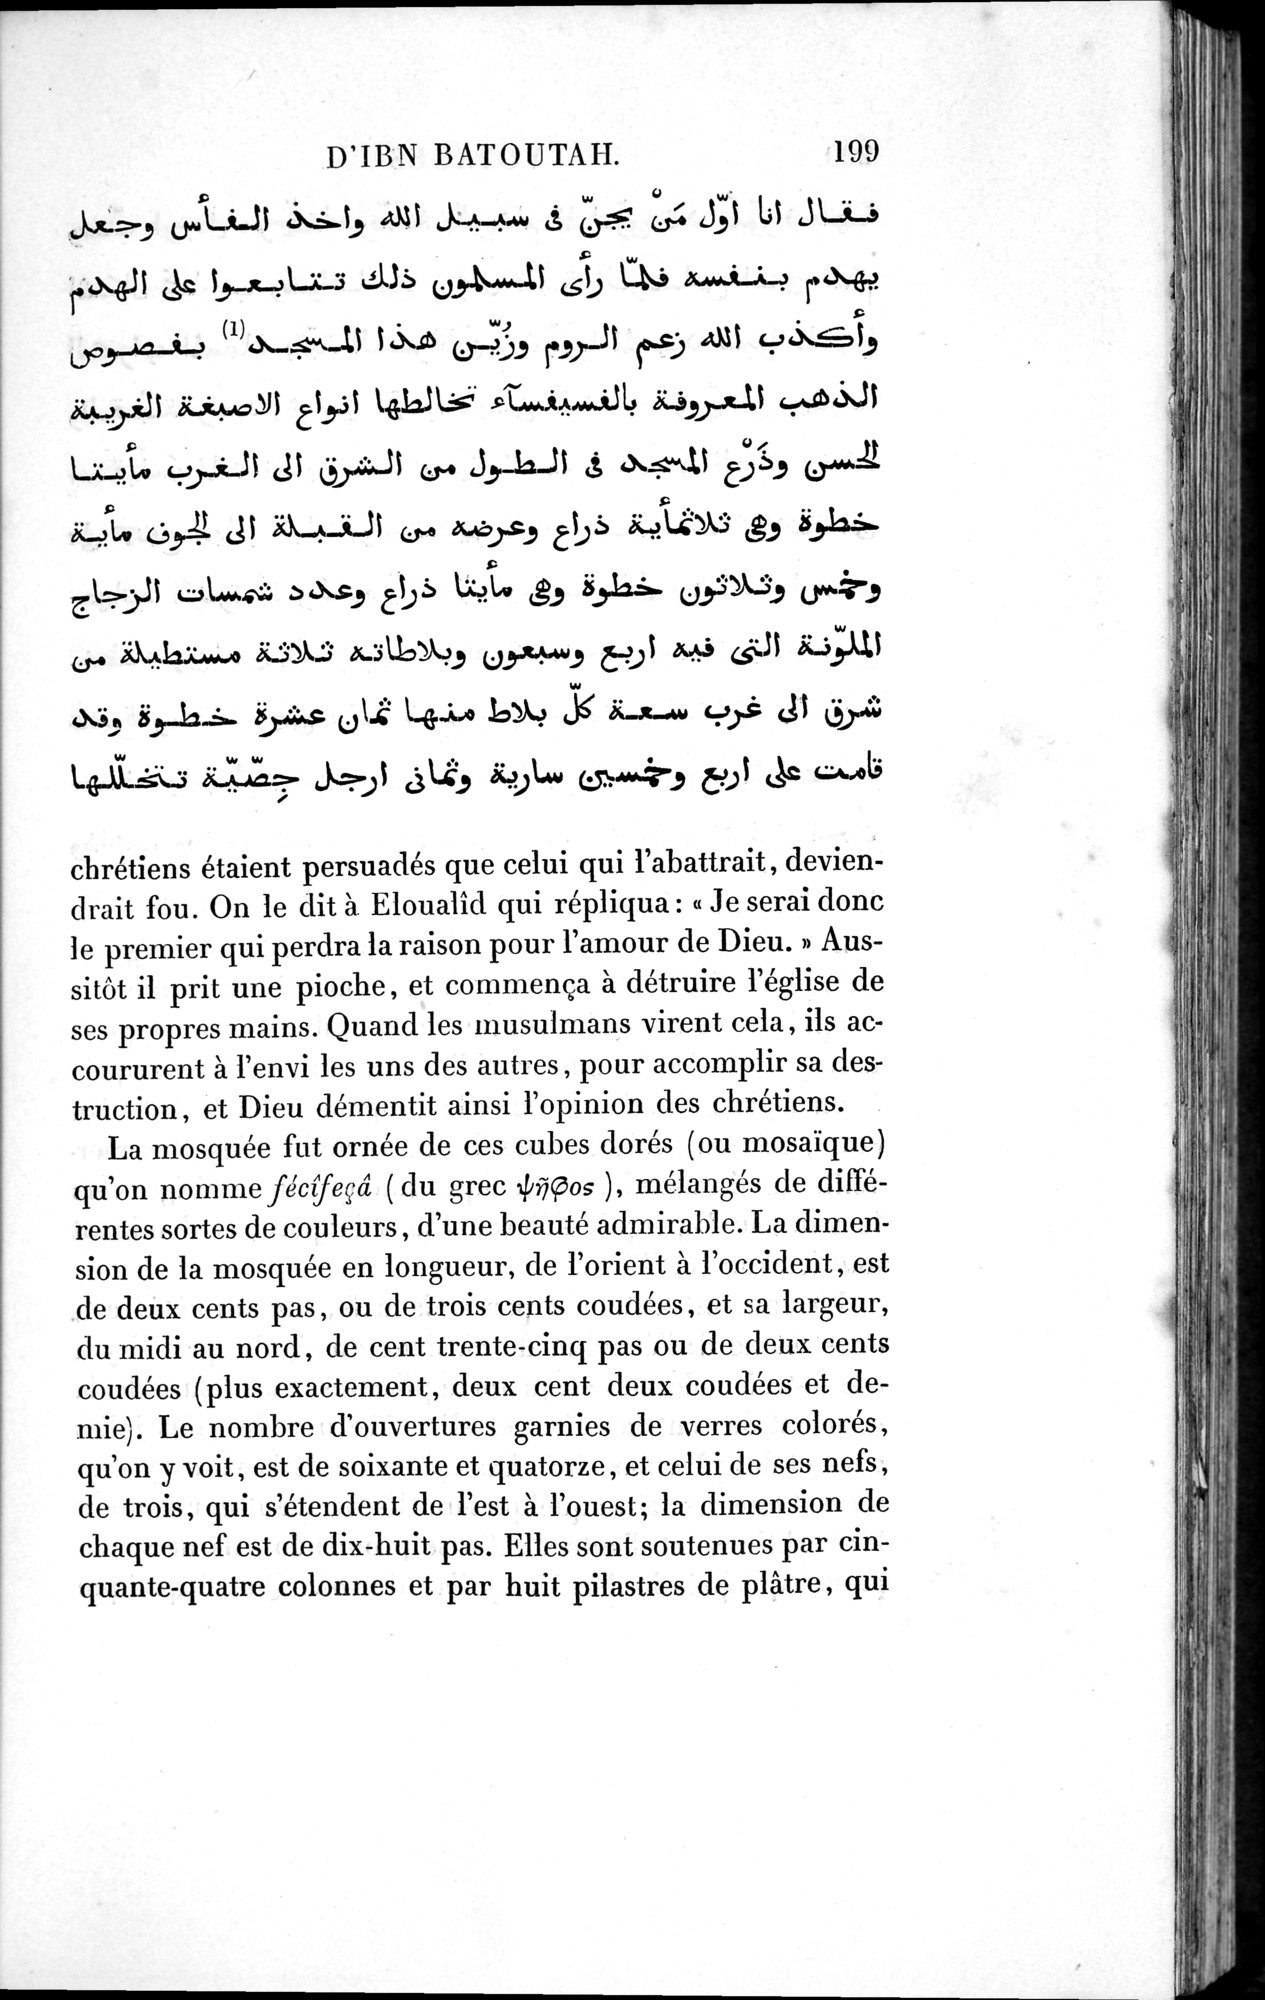 Voyages d'Ibn Batoutah : vol.1 / Page 259 (Grayscale High Resolution Image)